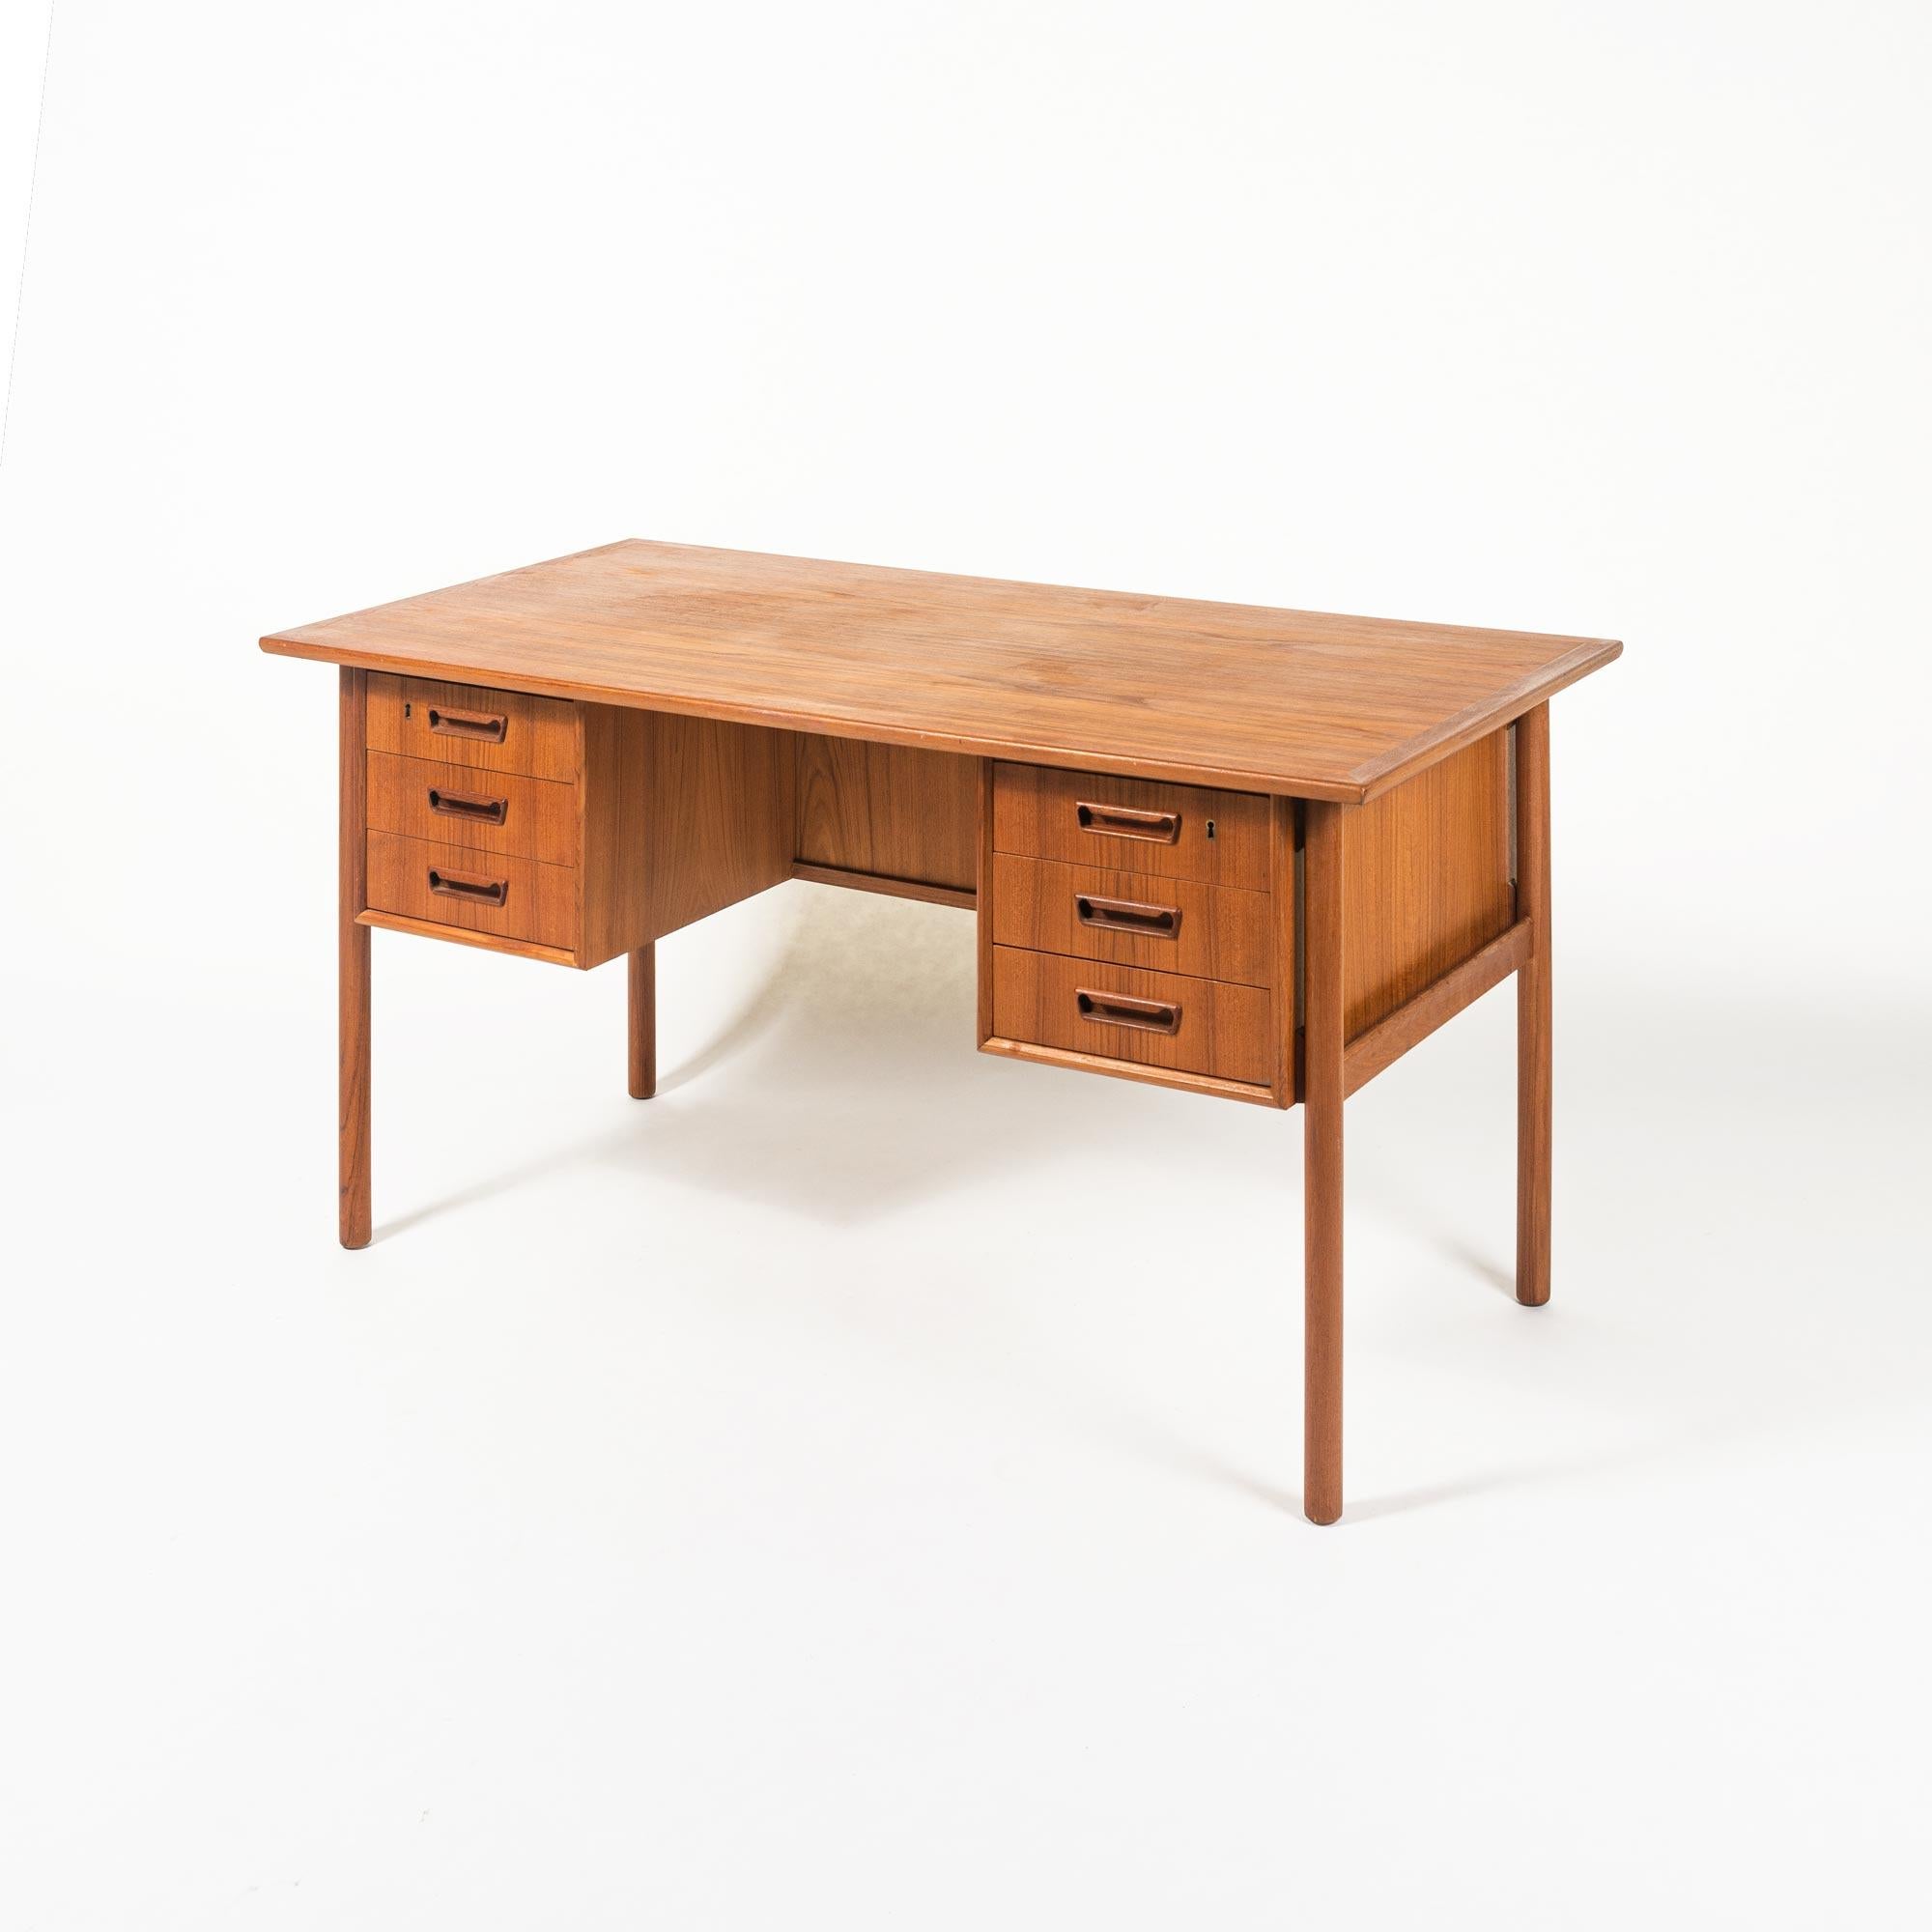 This executive desk designed by G. Nielsen Tibergaard was produced in Denmark in the 1960s. The desk is made of teak and free standing thanks to the finished back side with open storage space books . On the front there are two drawer modules with